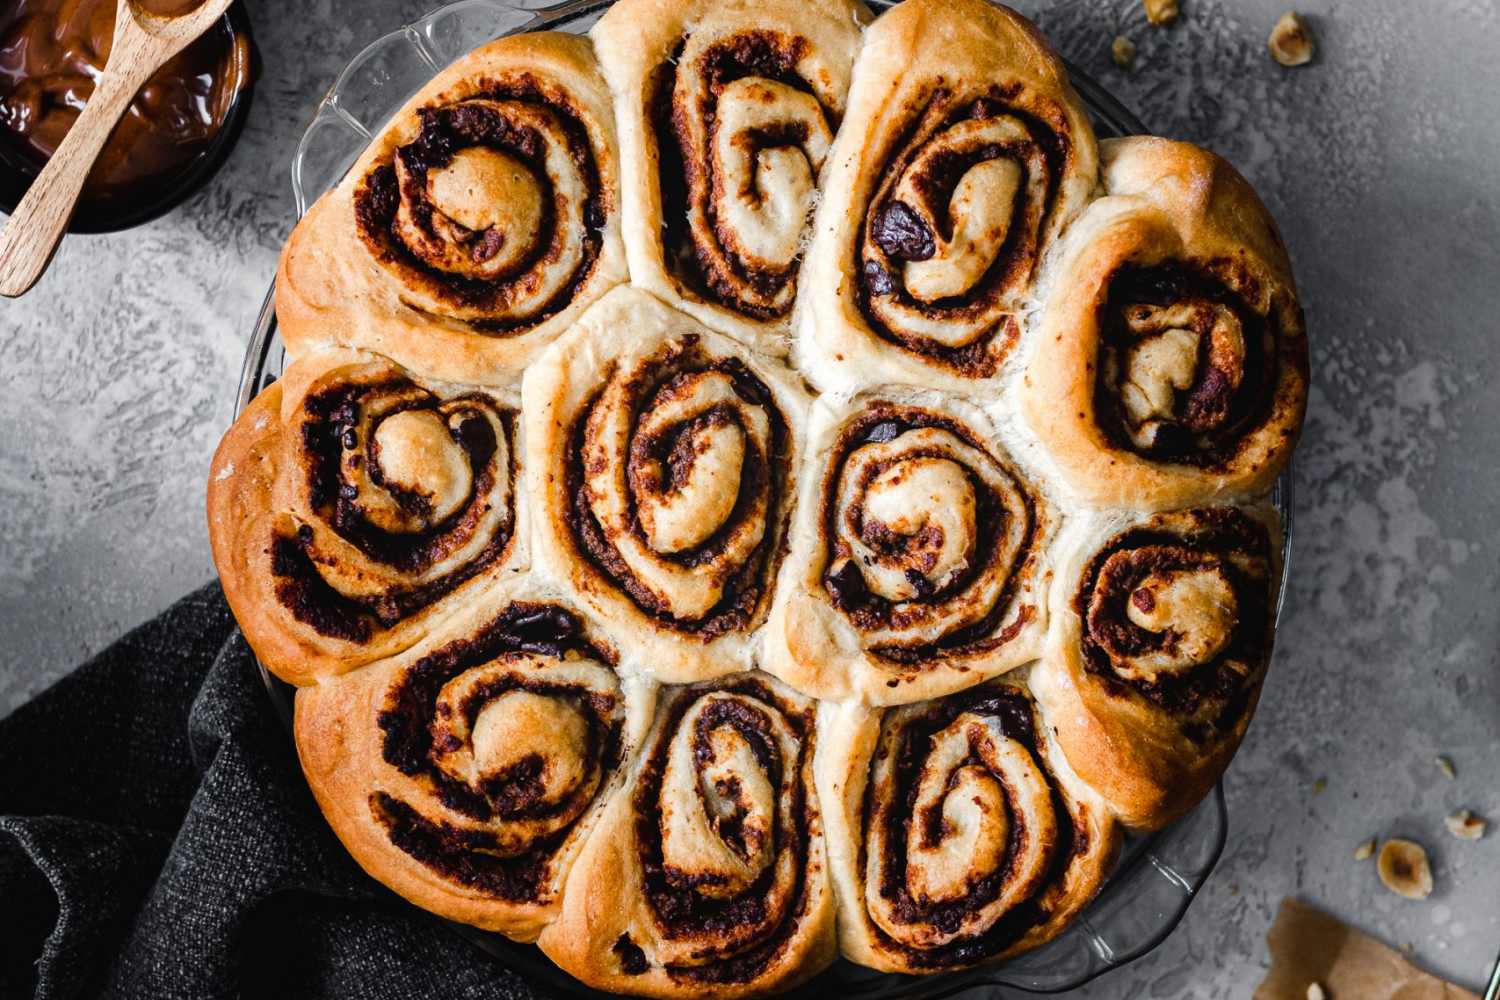 Chocolate hazelnut buns in a pan surrounded by whole hazelnuts